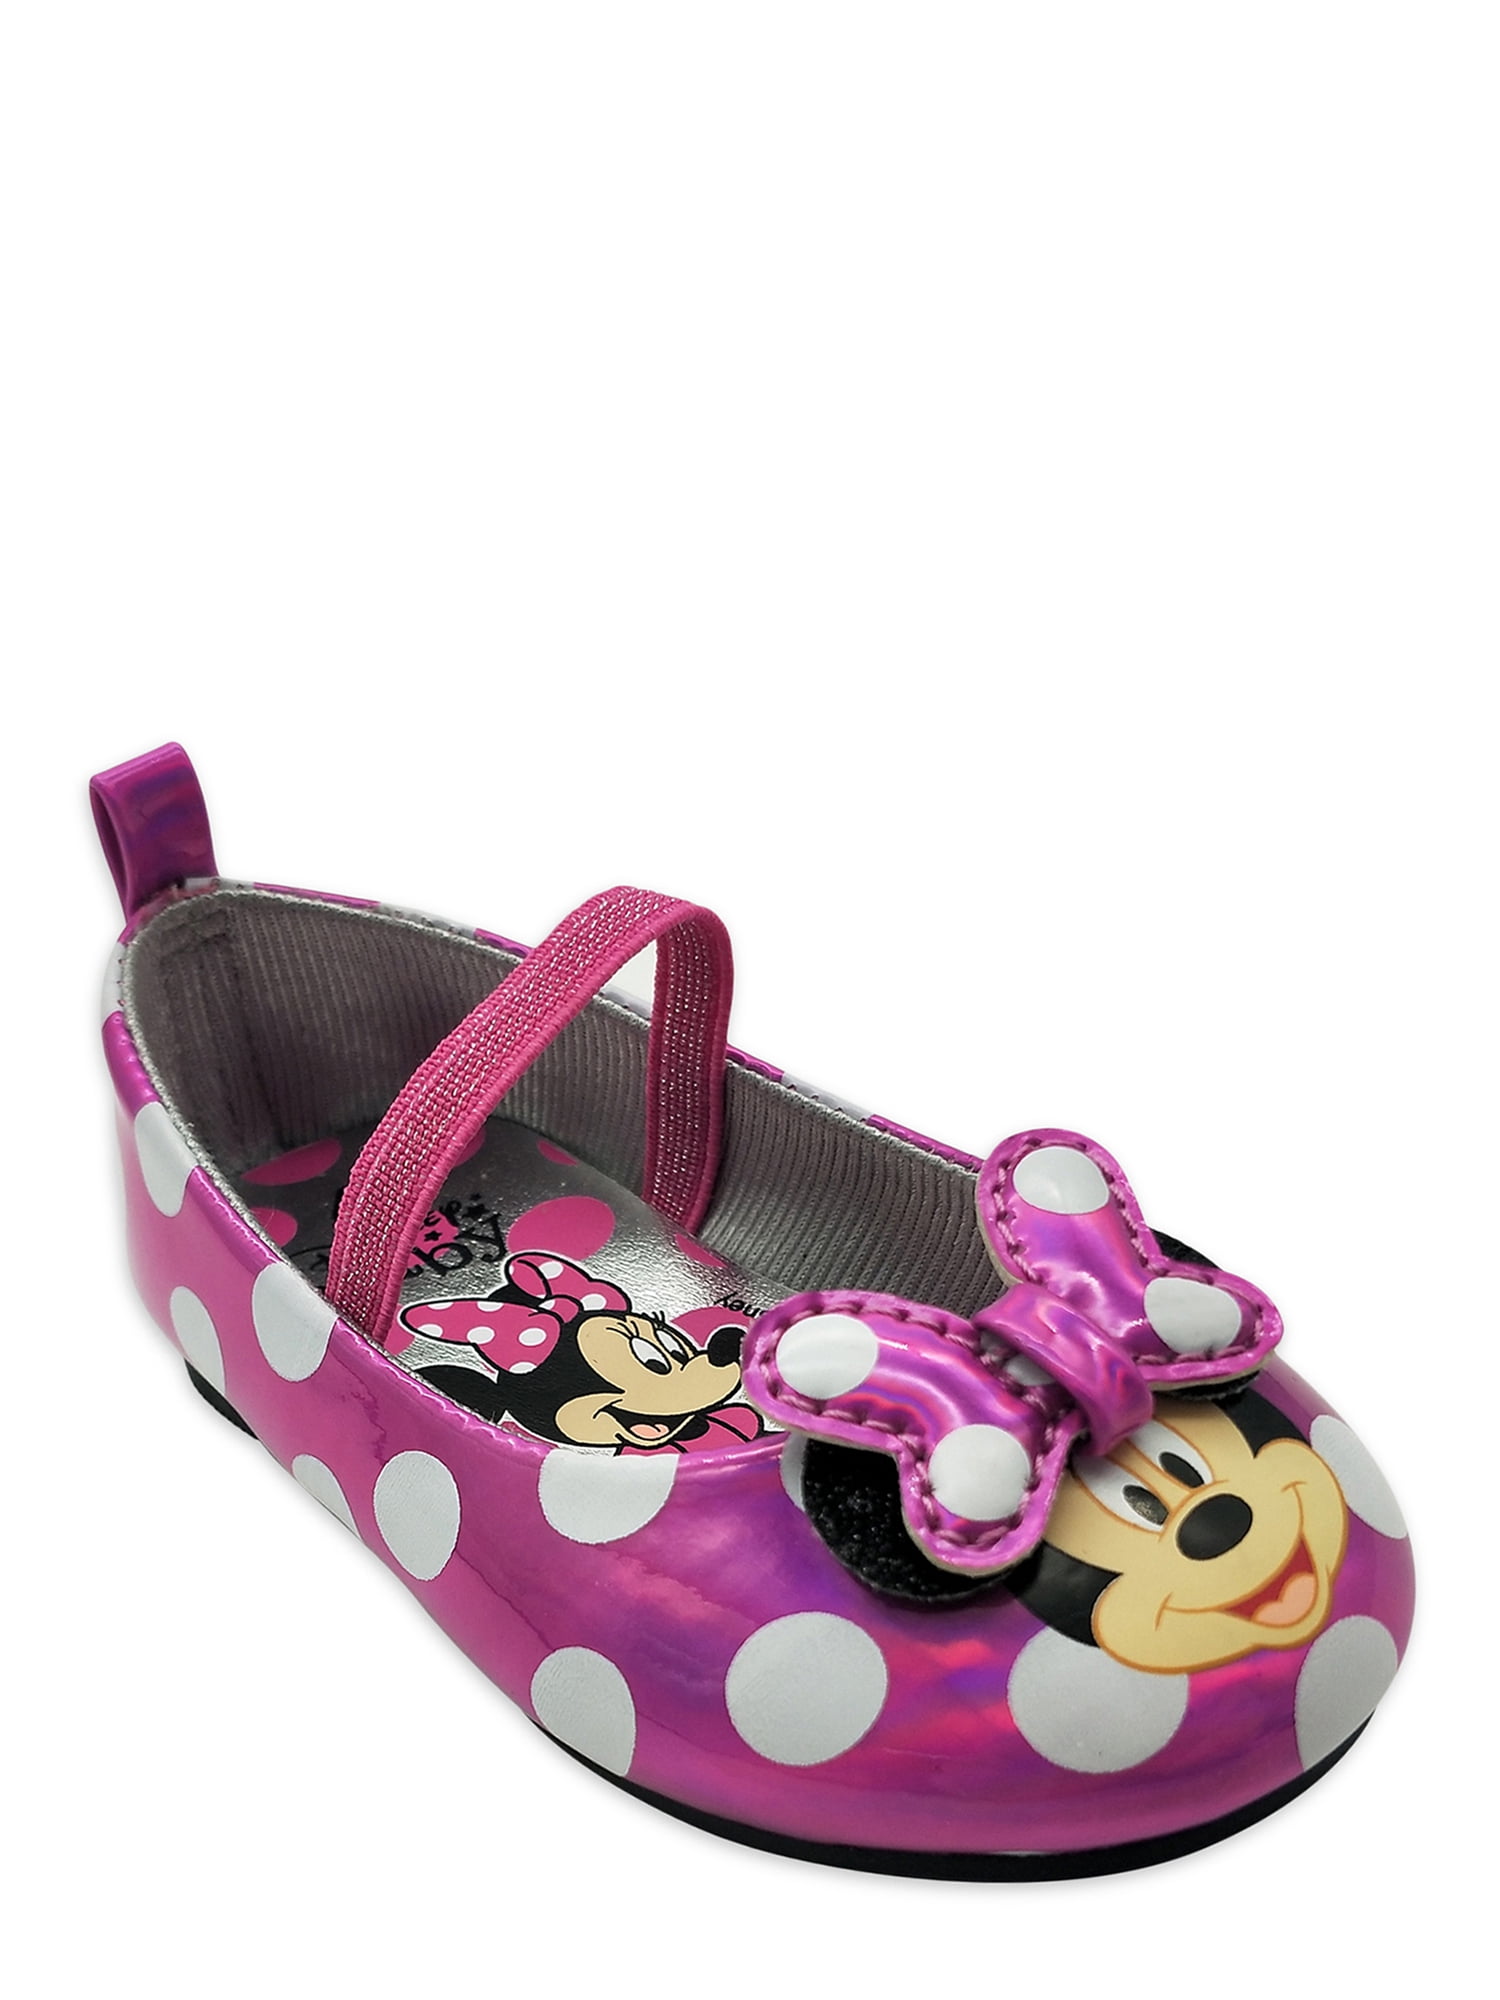 Disney Store Baby Girl MINNIE MOUSE Costume Ballet Flats Crib Shoes New 